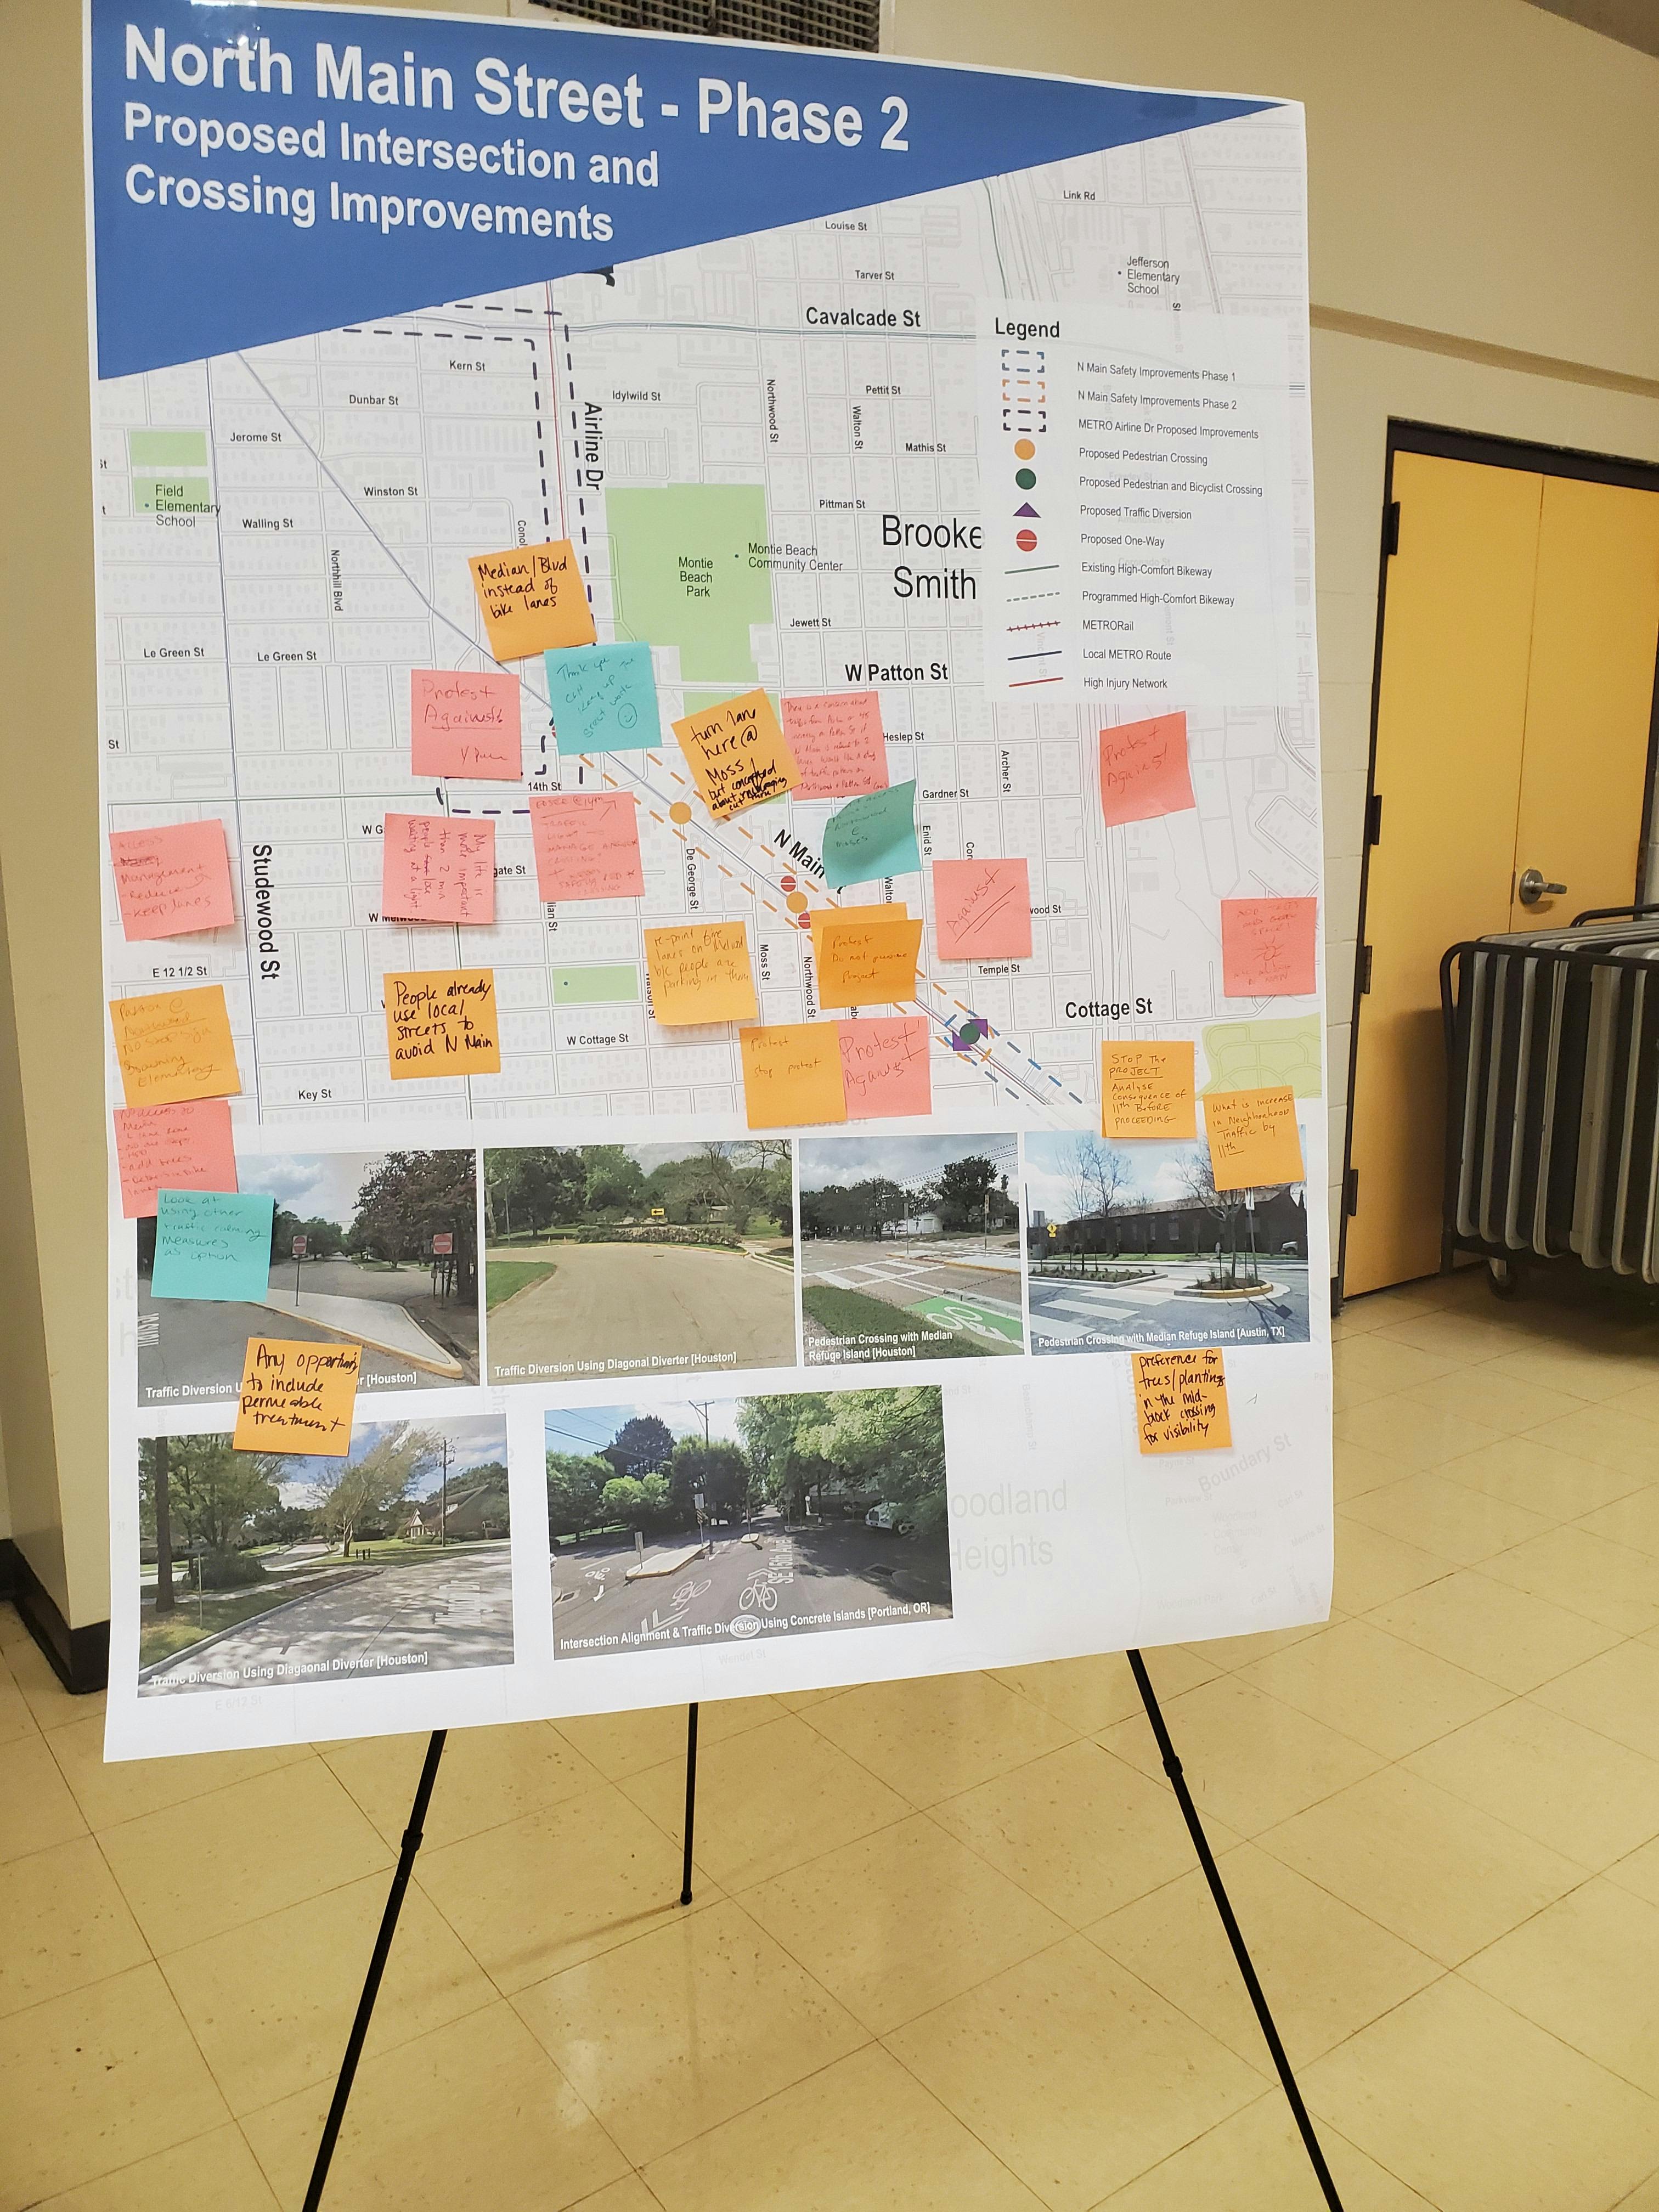 Proposed Intersection and Crossing Improvements Phase 2 Posterboard